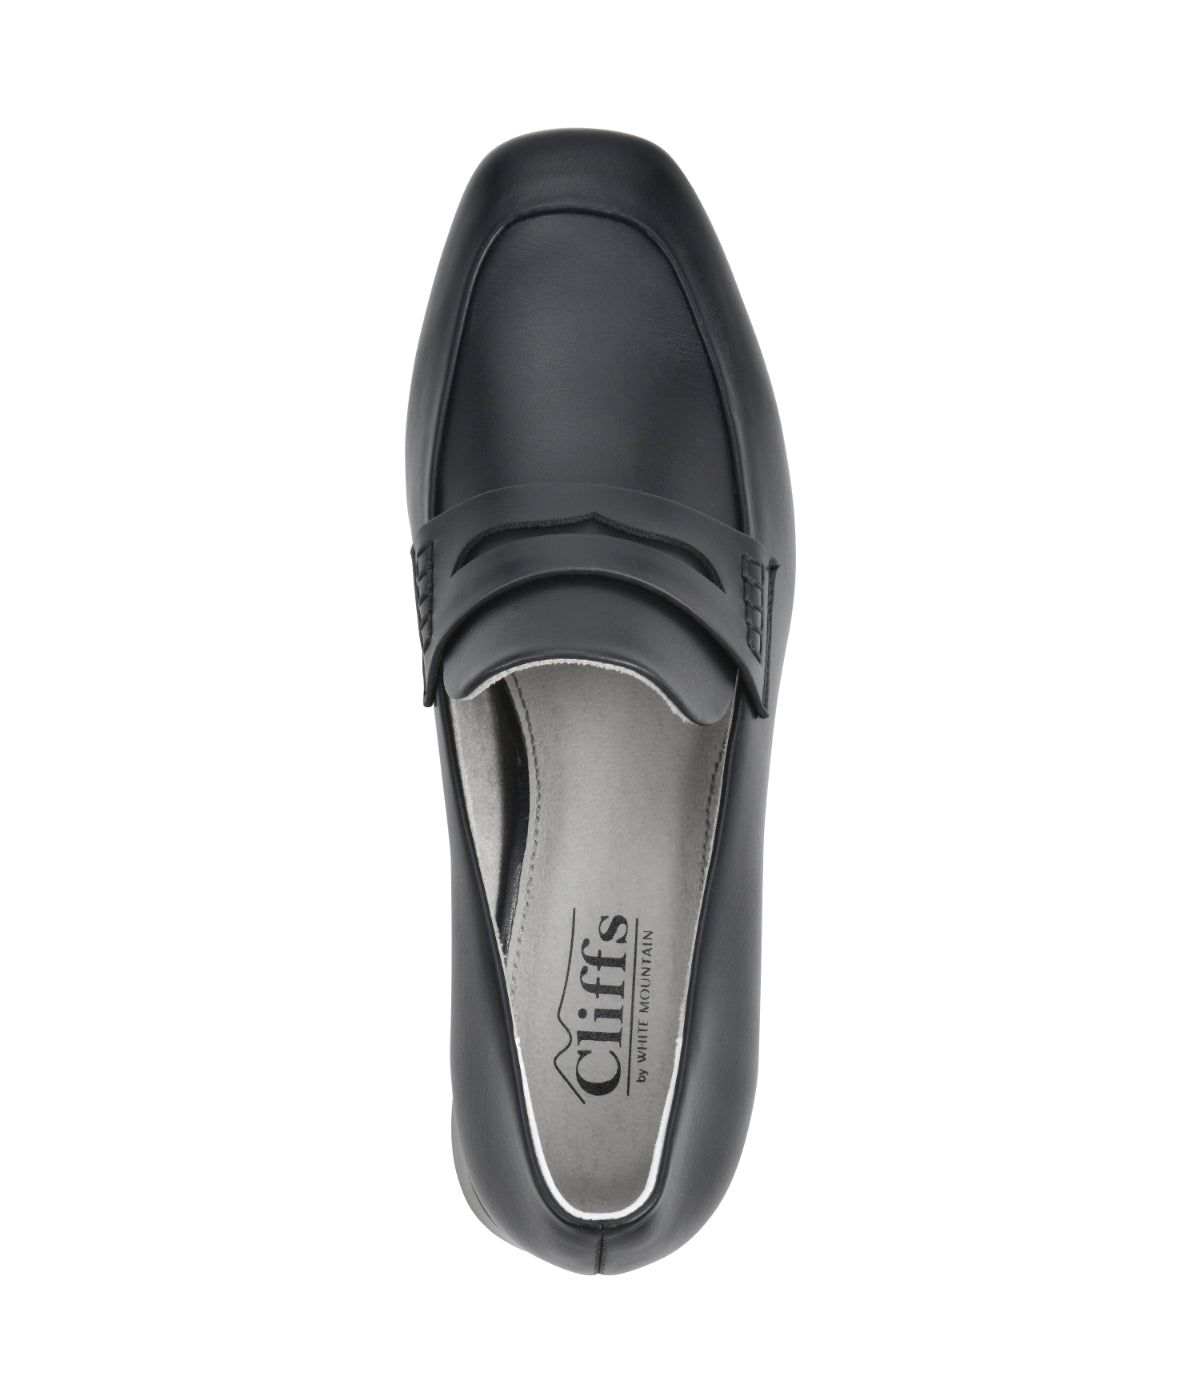 Quiana Dress Loafers Black/Smooth